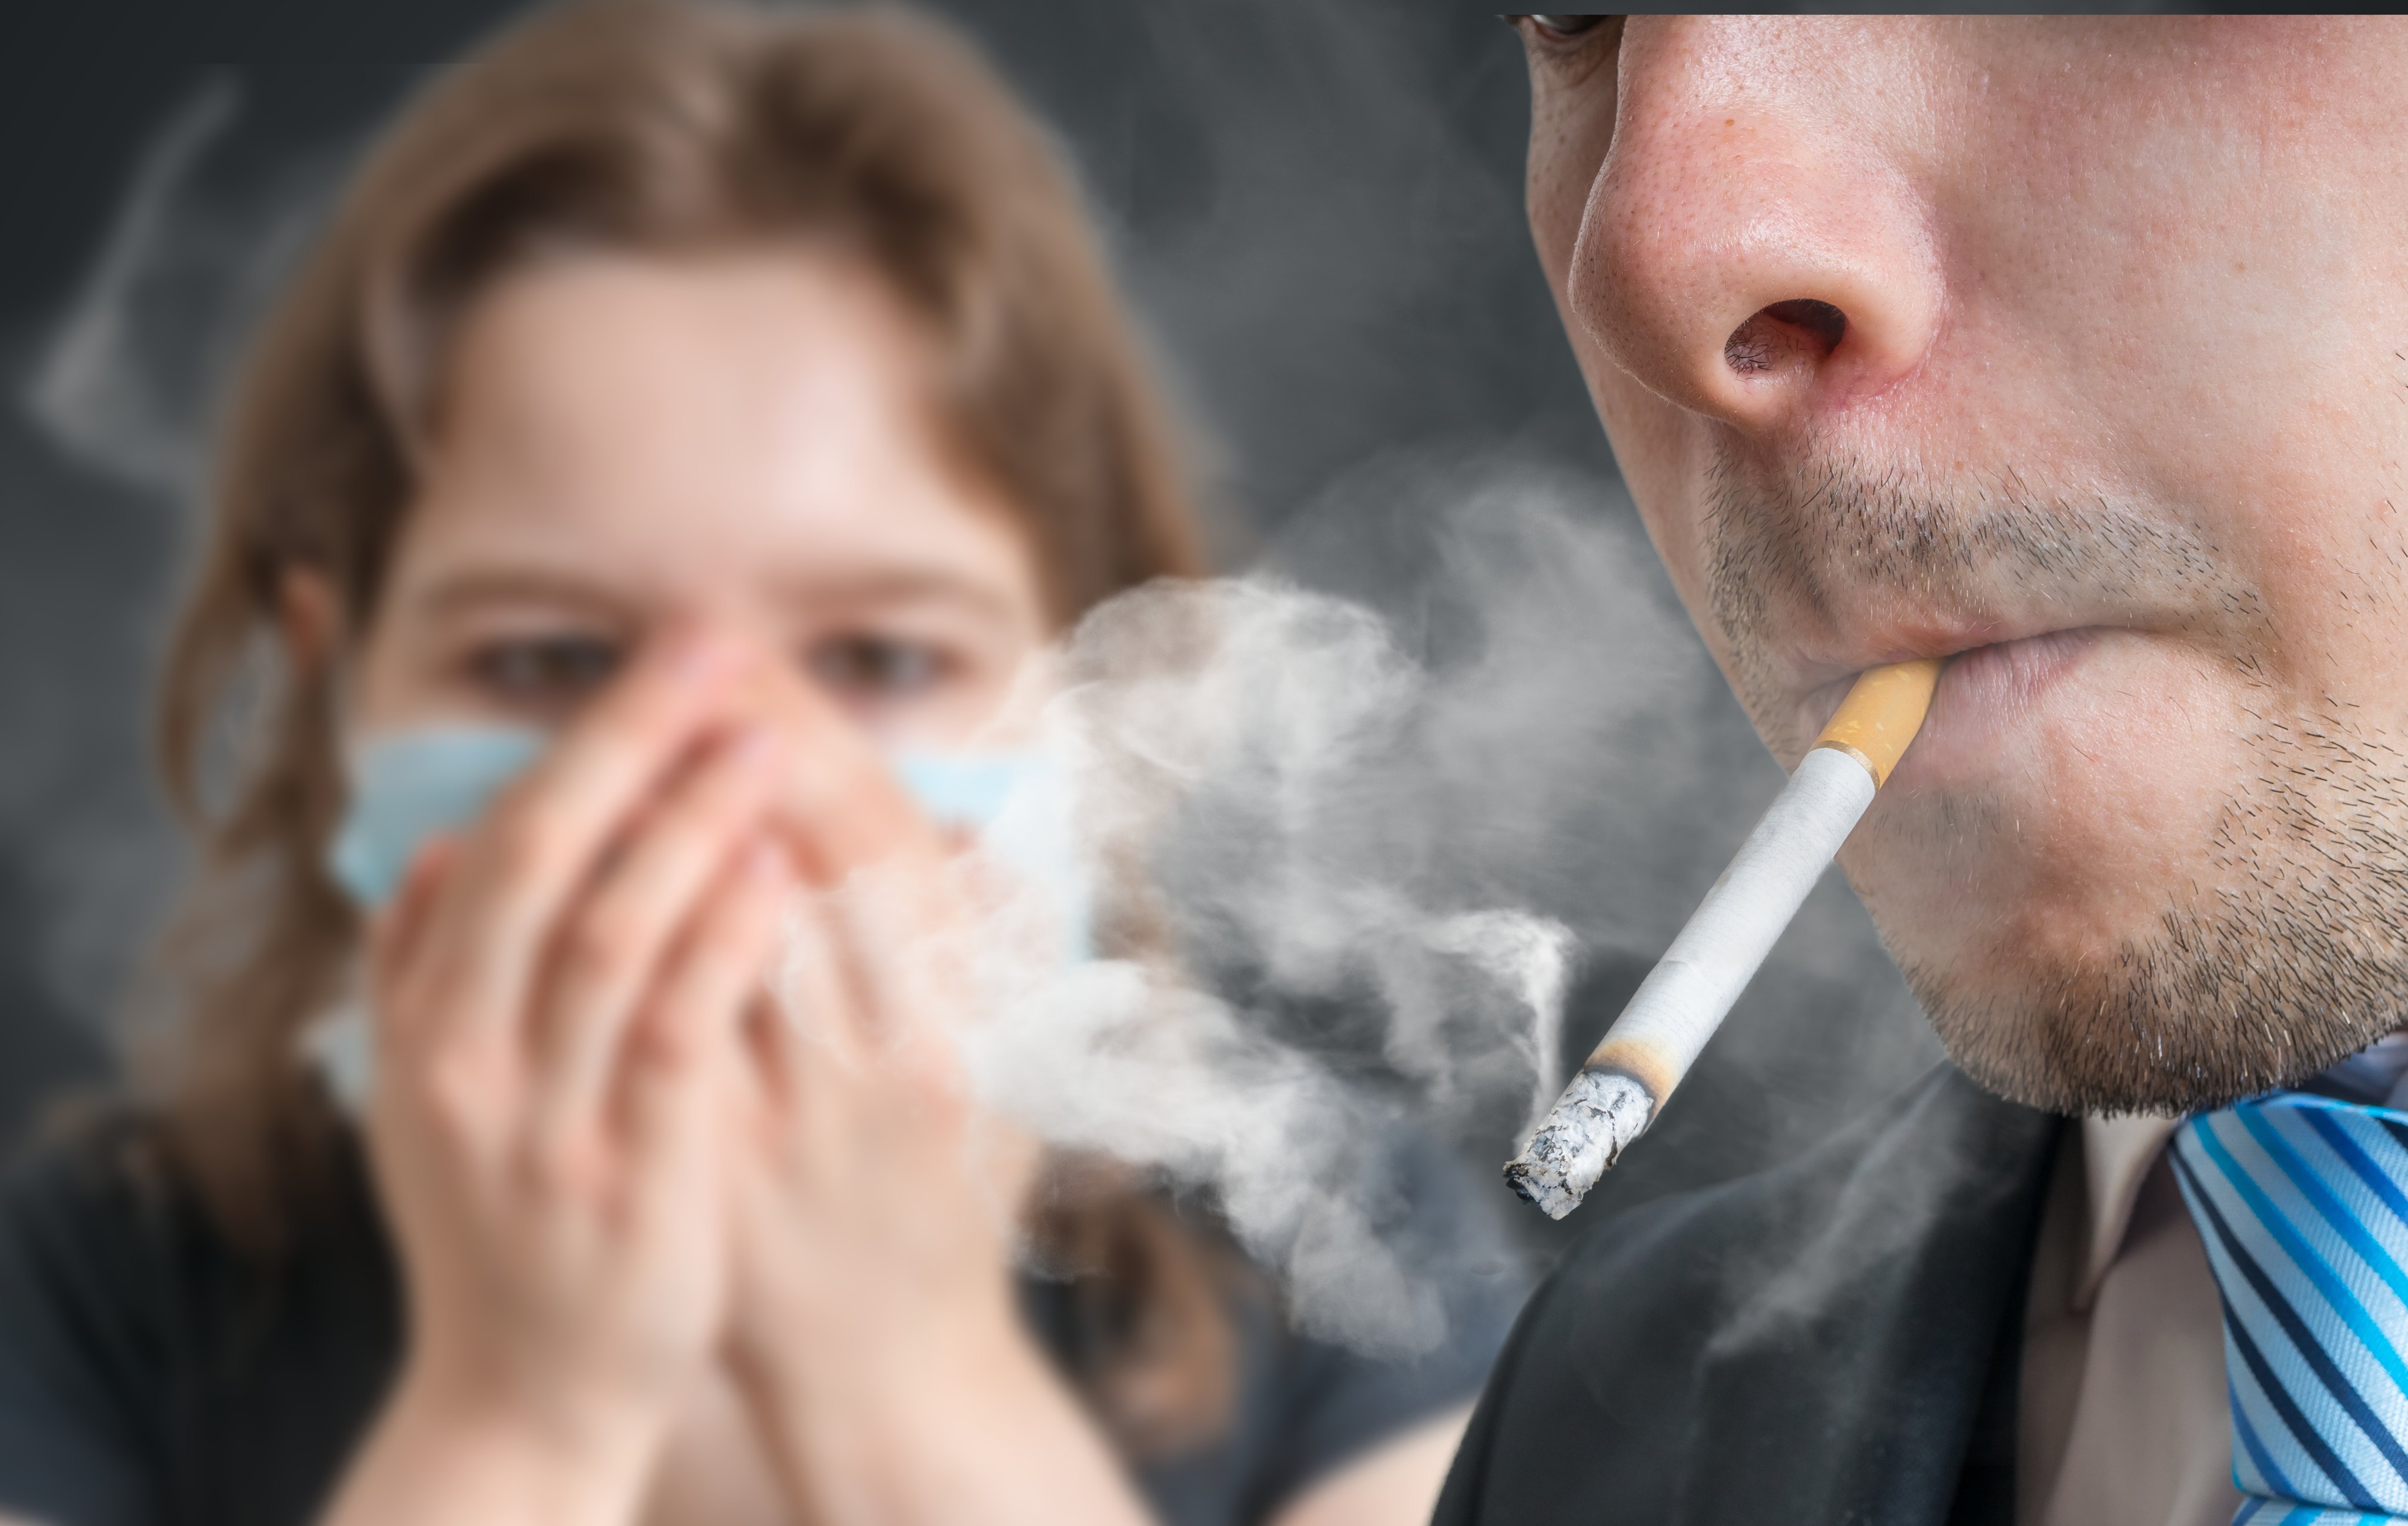 A UK study found that, before the pandemic, smoking prevalence fell by 5.2% per year, but the rate of decline slowed to 0.3% per year during the pandemic. Photo: Shutterstock